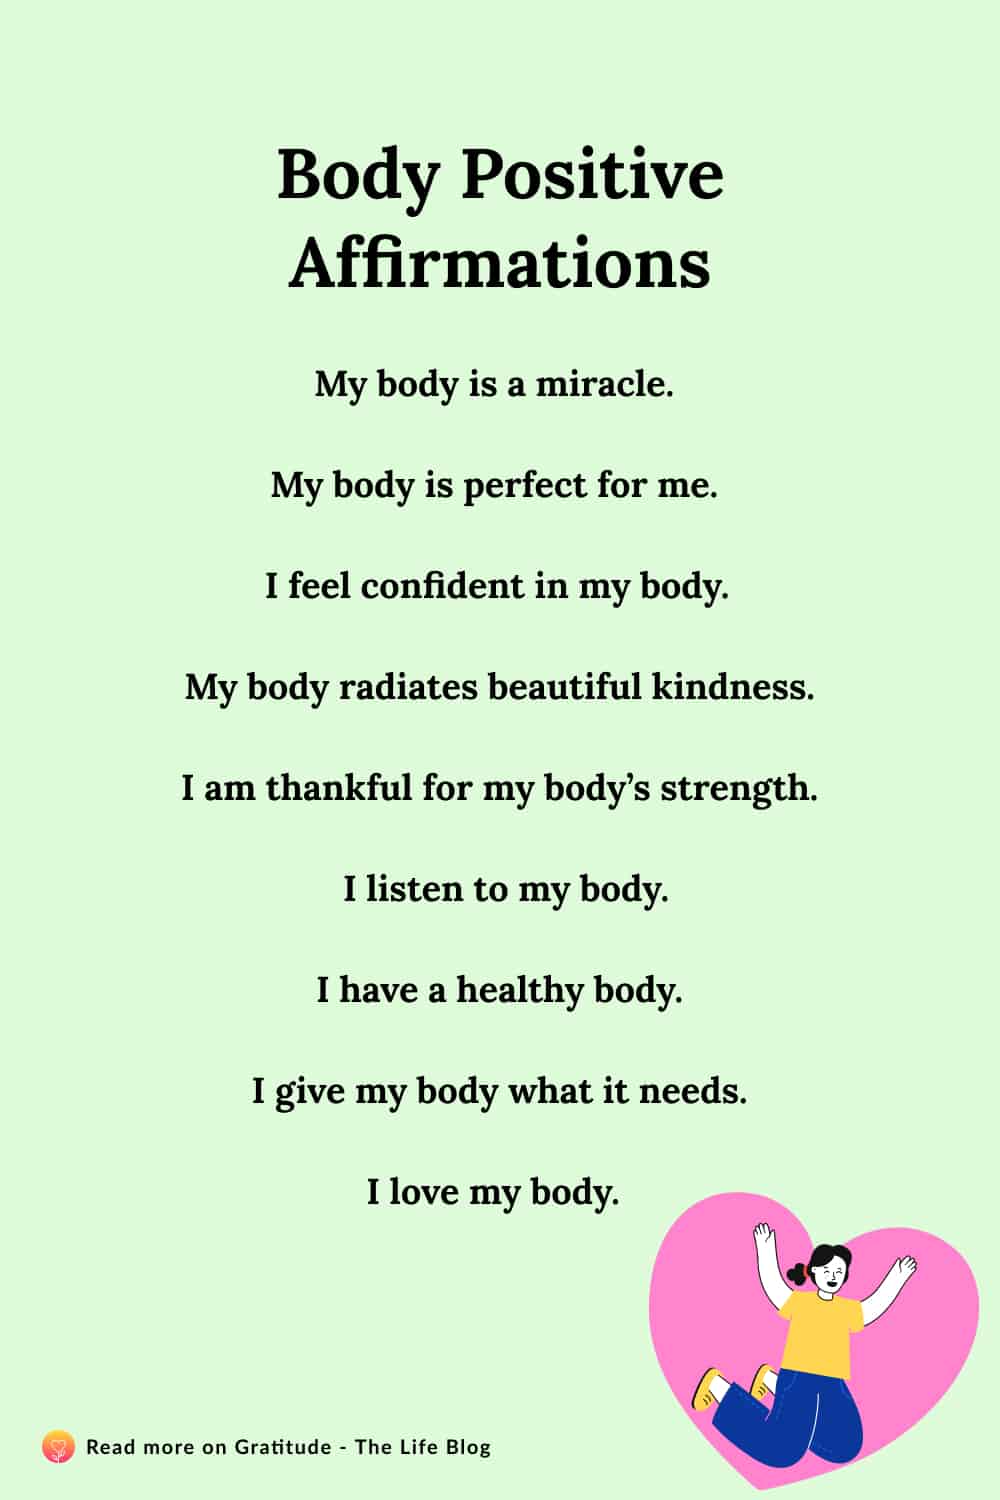 Image with list of body positive affirmations